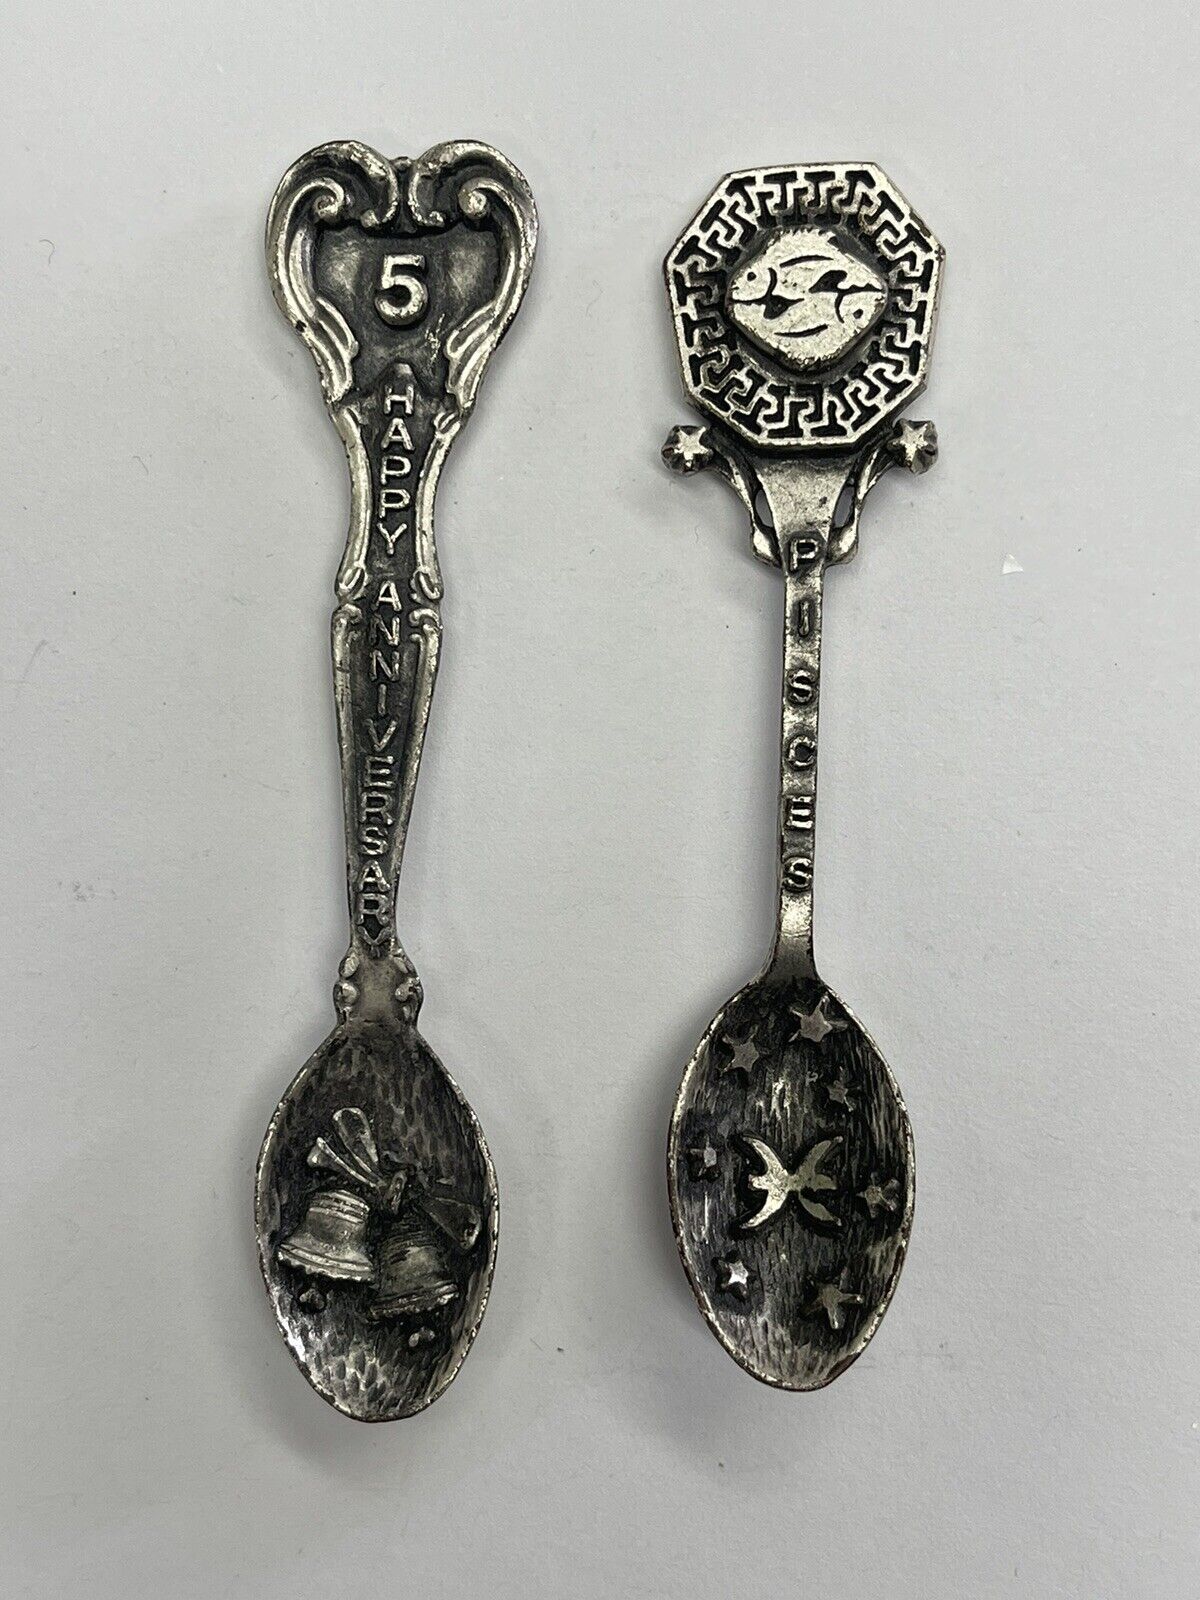 2 Gish Collectible Pewter Spoons. Zodiac Pisces ♓️ and 5 Year Happy Anniversary.